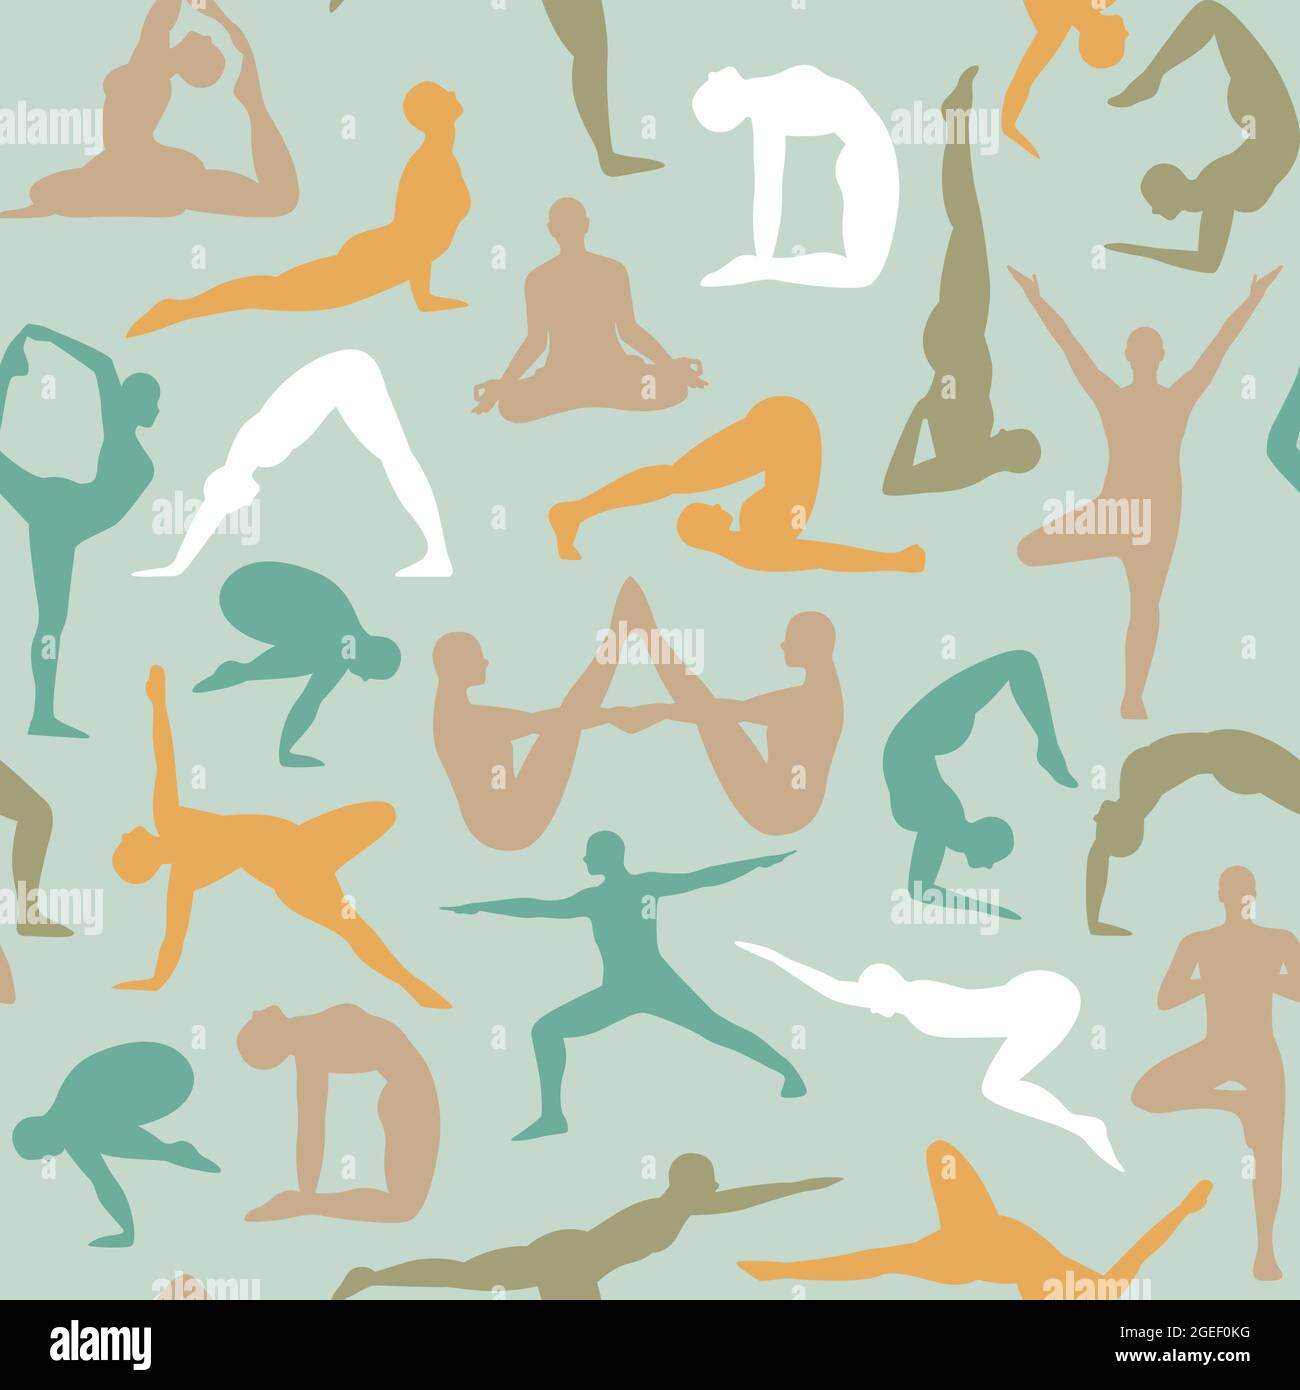 Seamless pattern illustration of people body silhouette doing different yoga exercise poses. Healthy lifestyle background with diverse characters medi Stock Vector